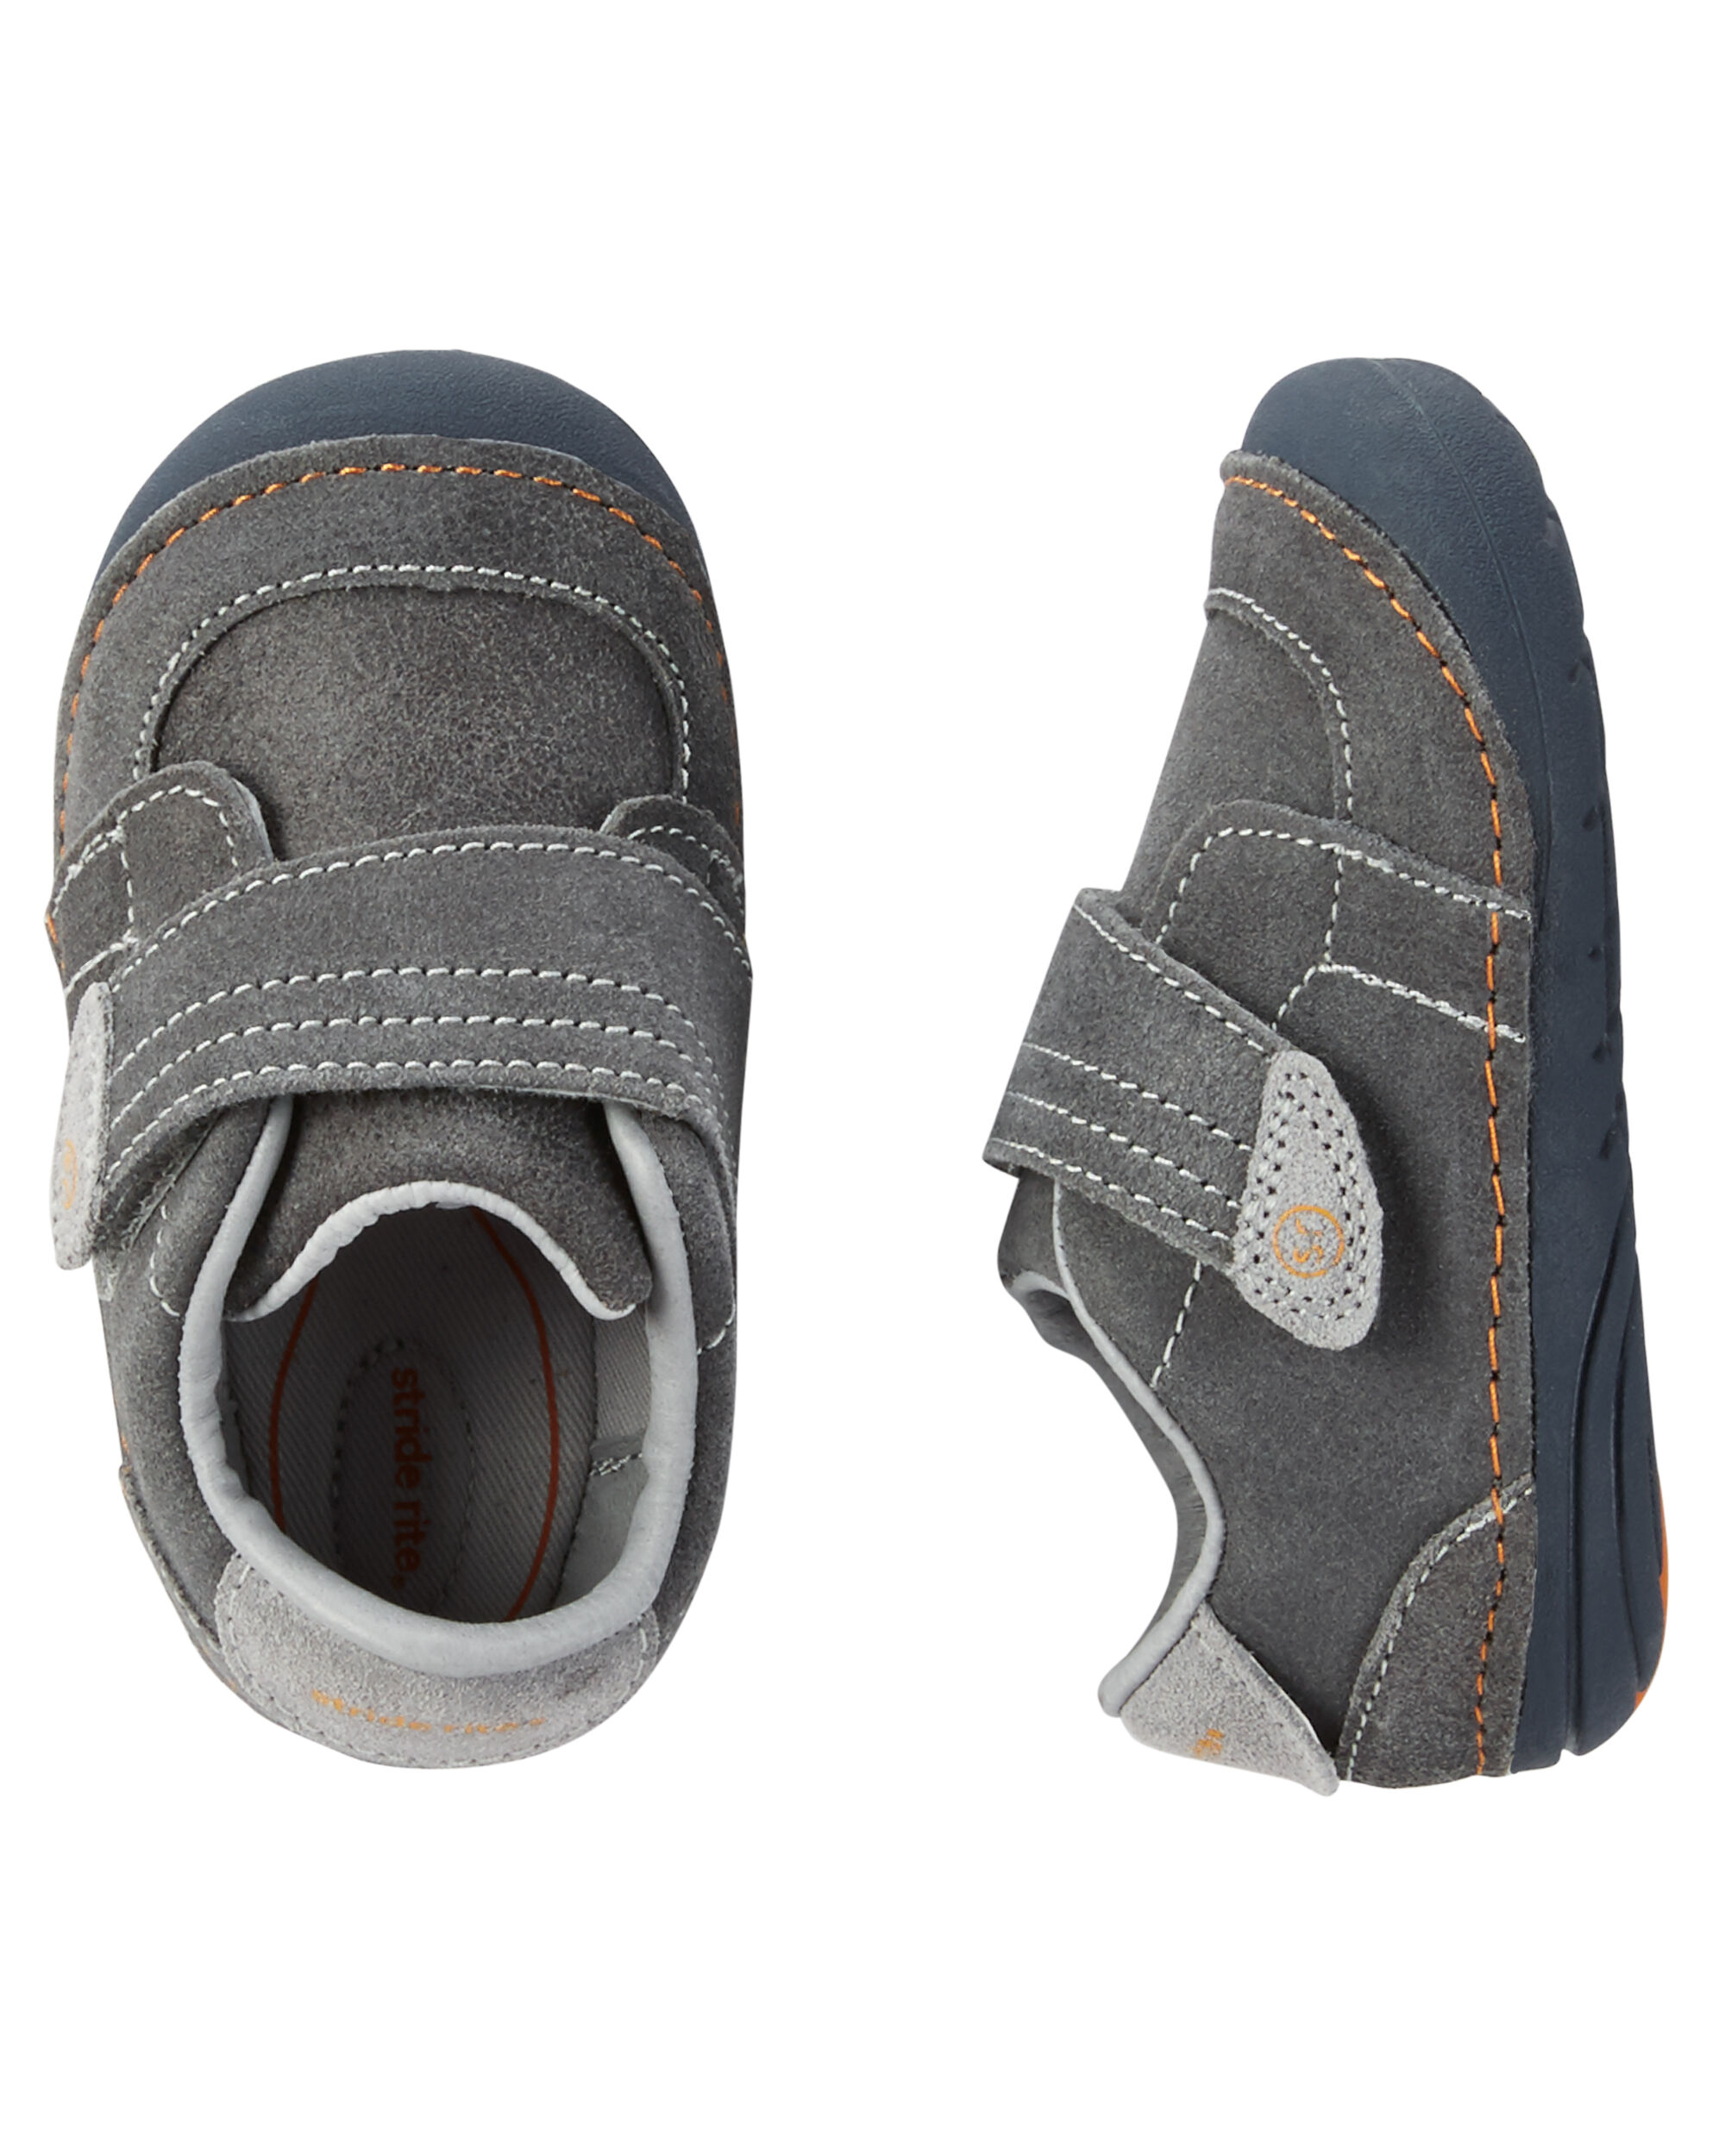 carters stride rite shoes